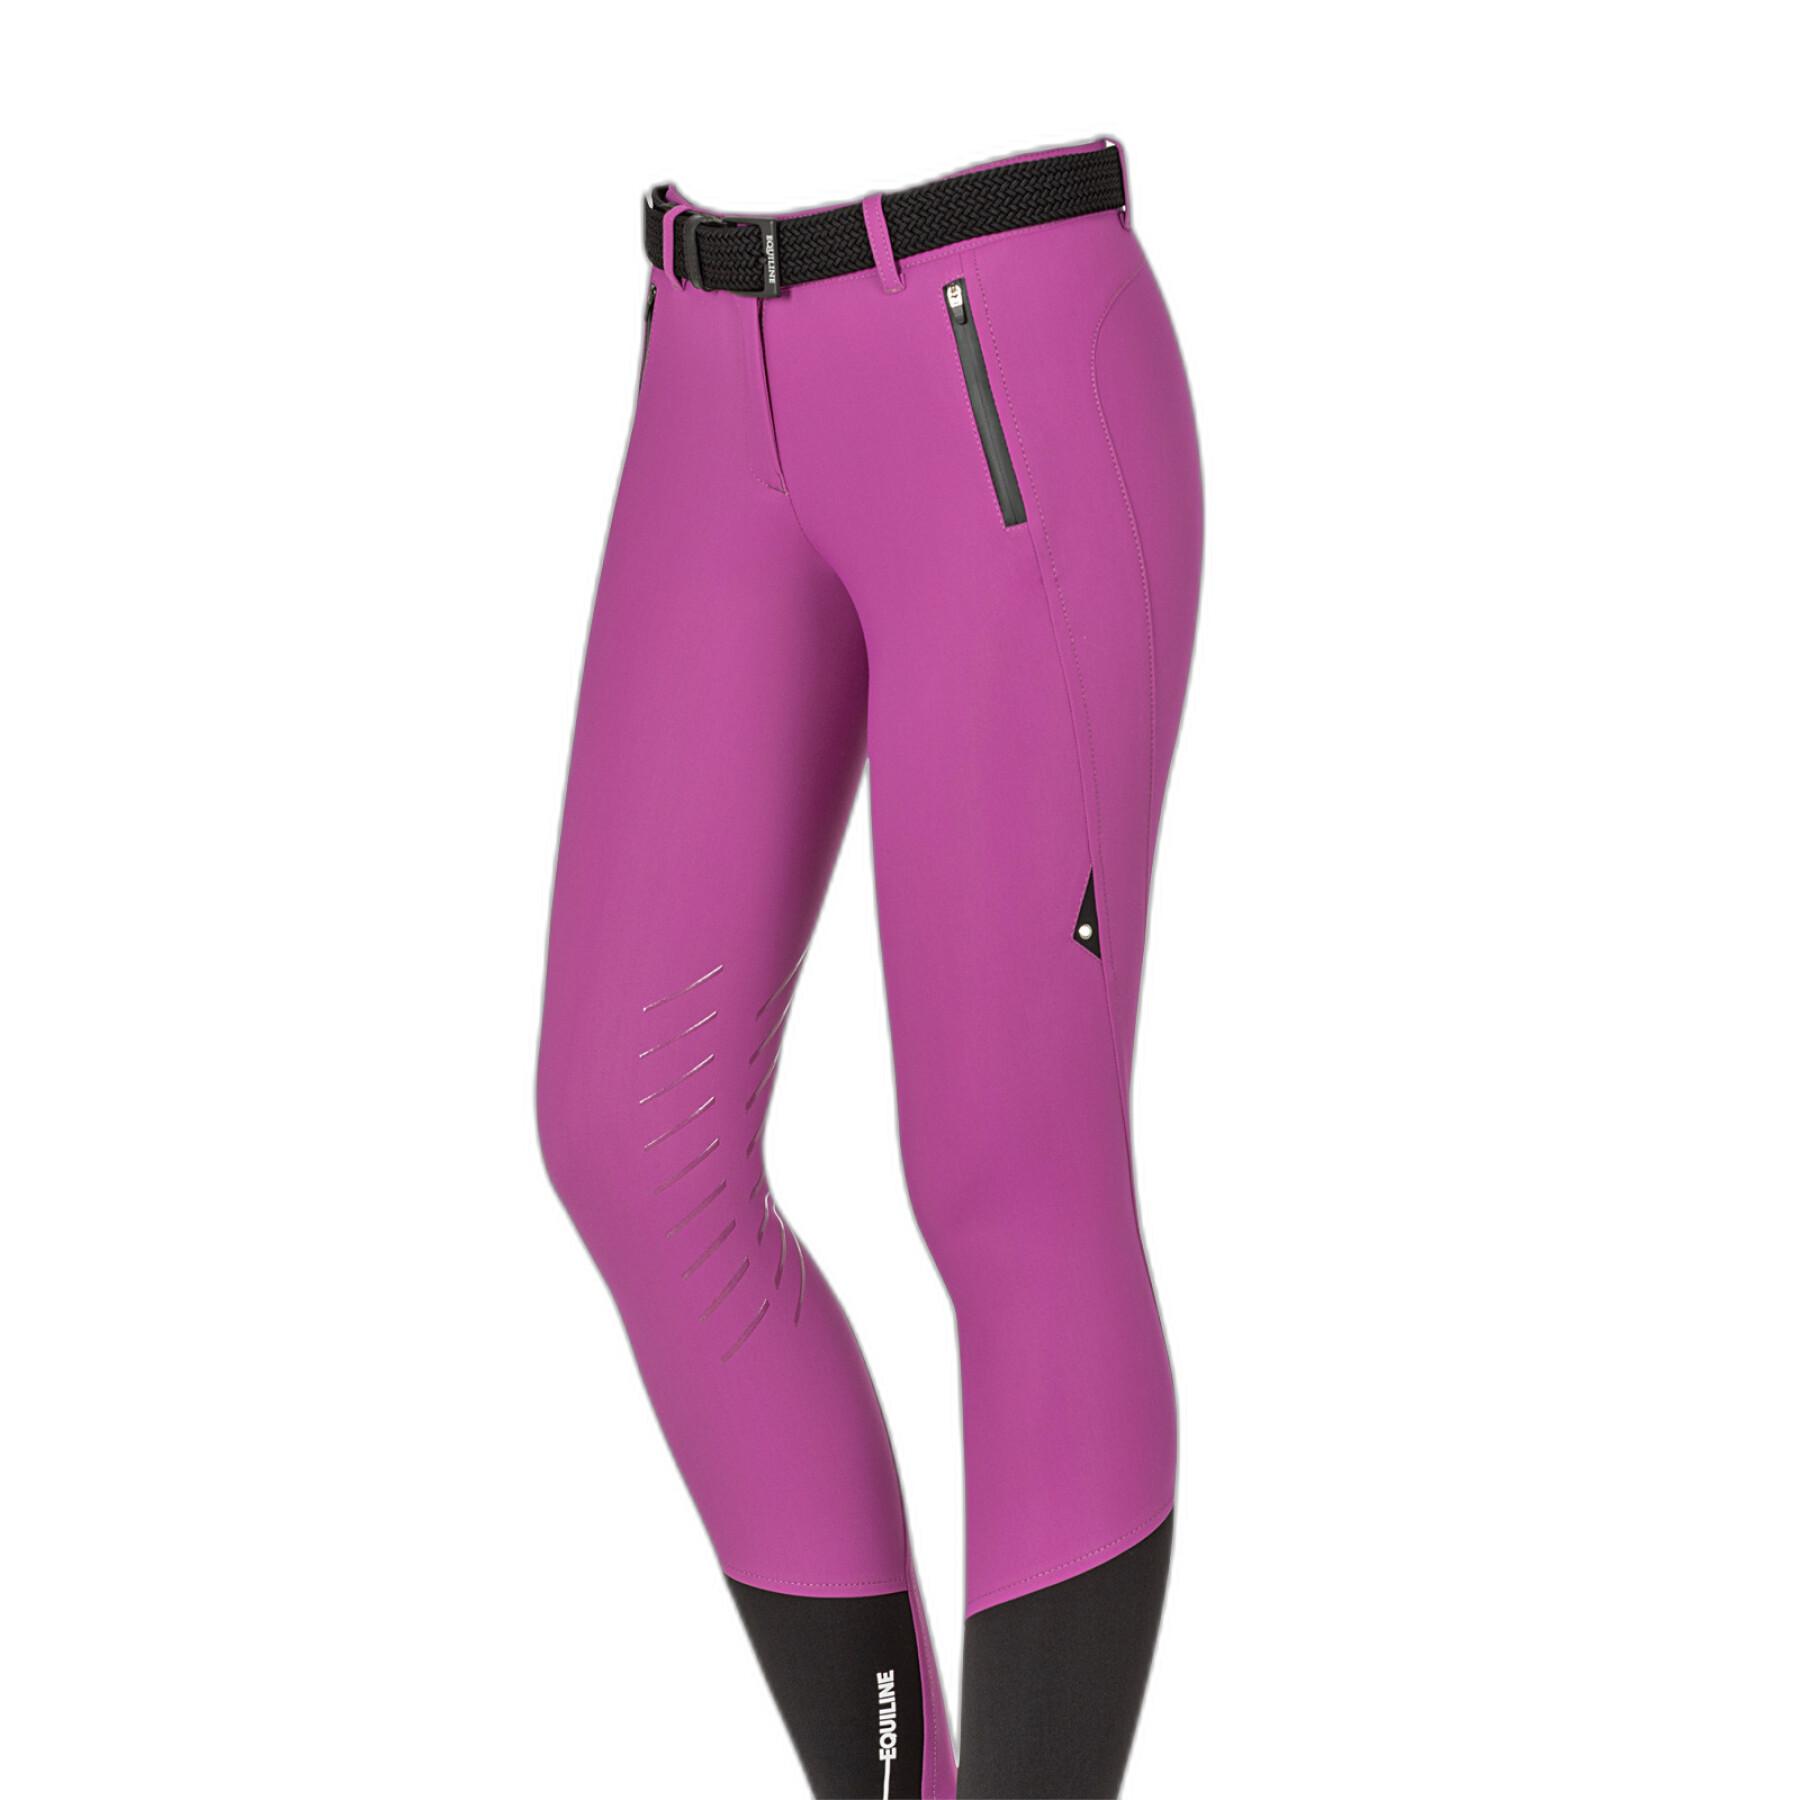 Women's riding pants Equiline Cantak